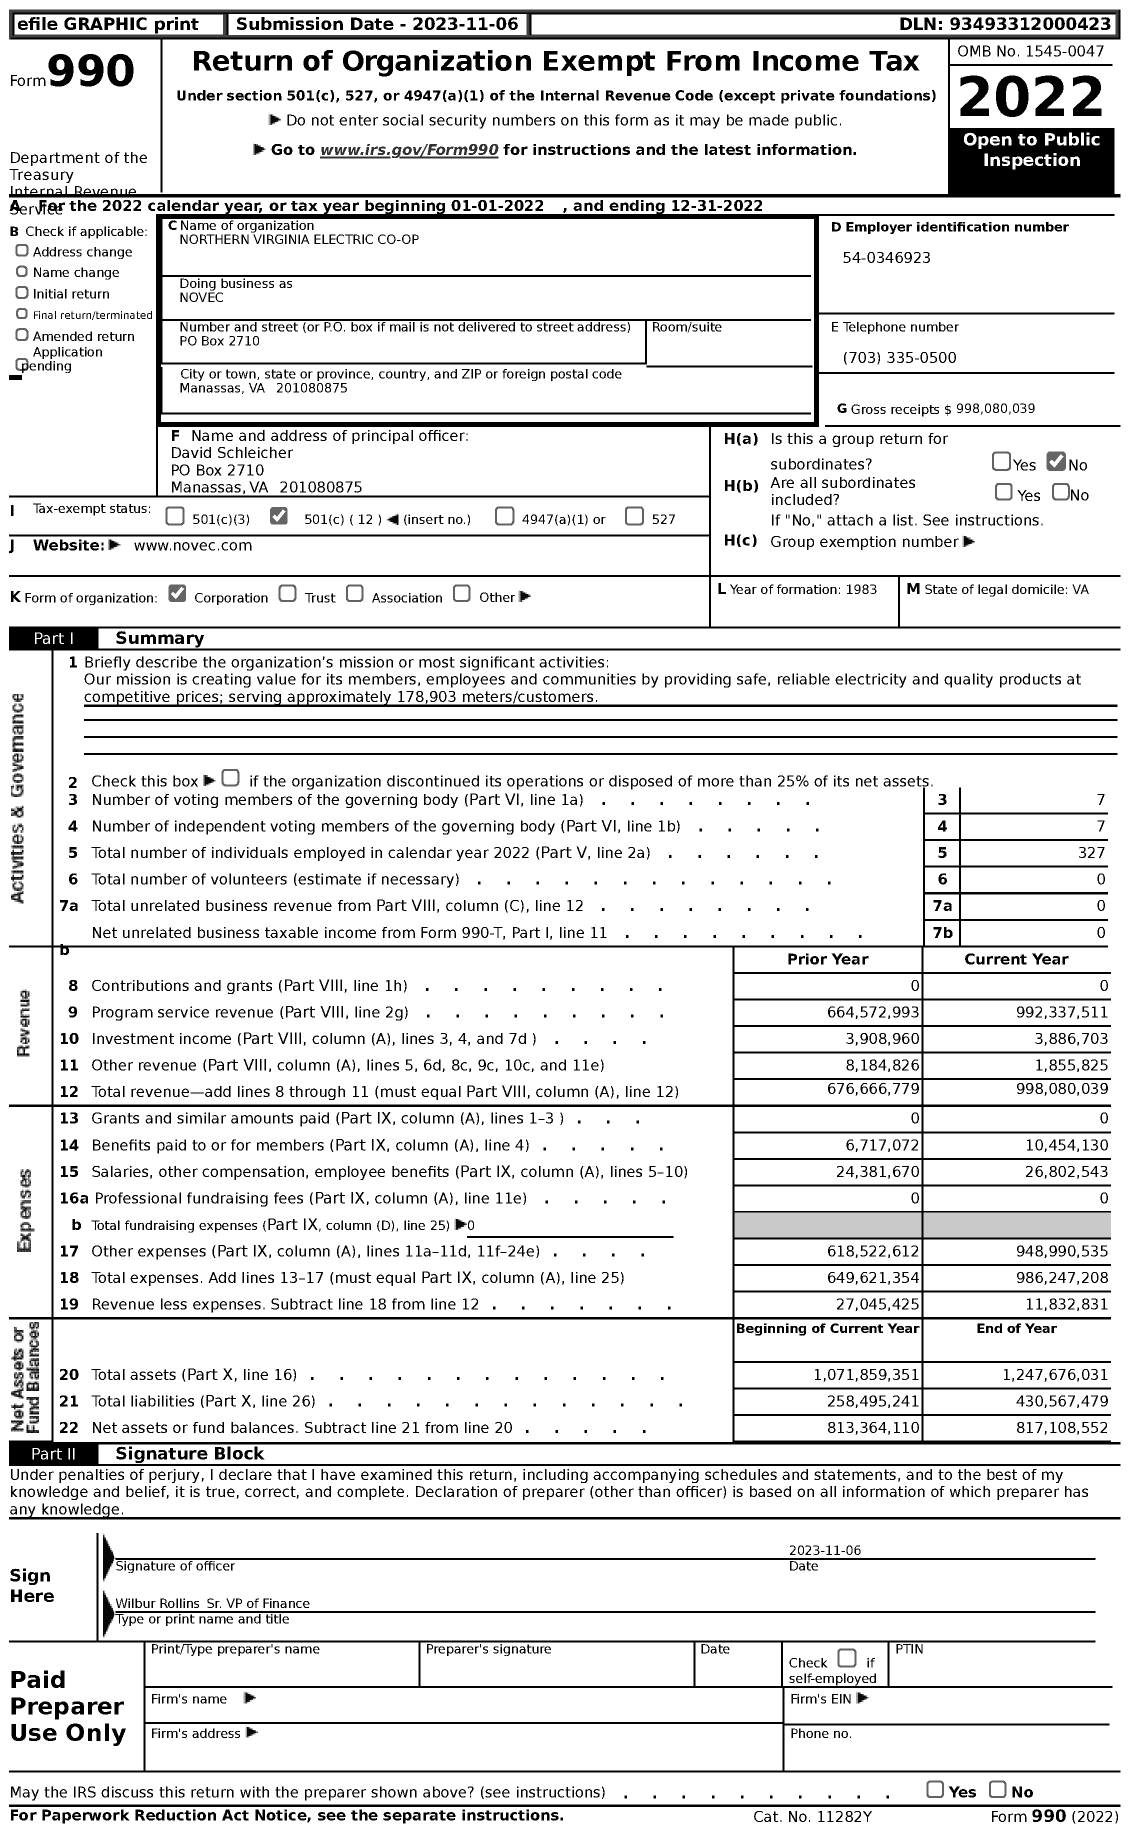 Image of first page of 2022 Form 990 for Northern Virginia Electric Co-Op (NOVEC)